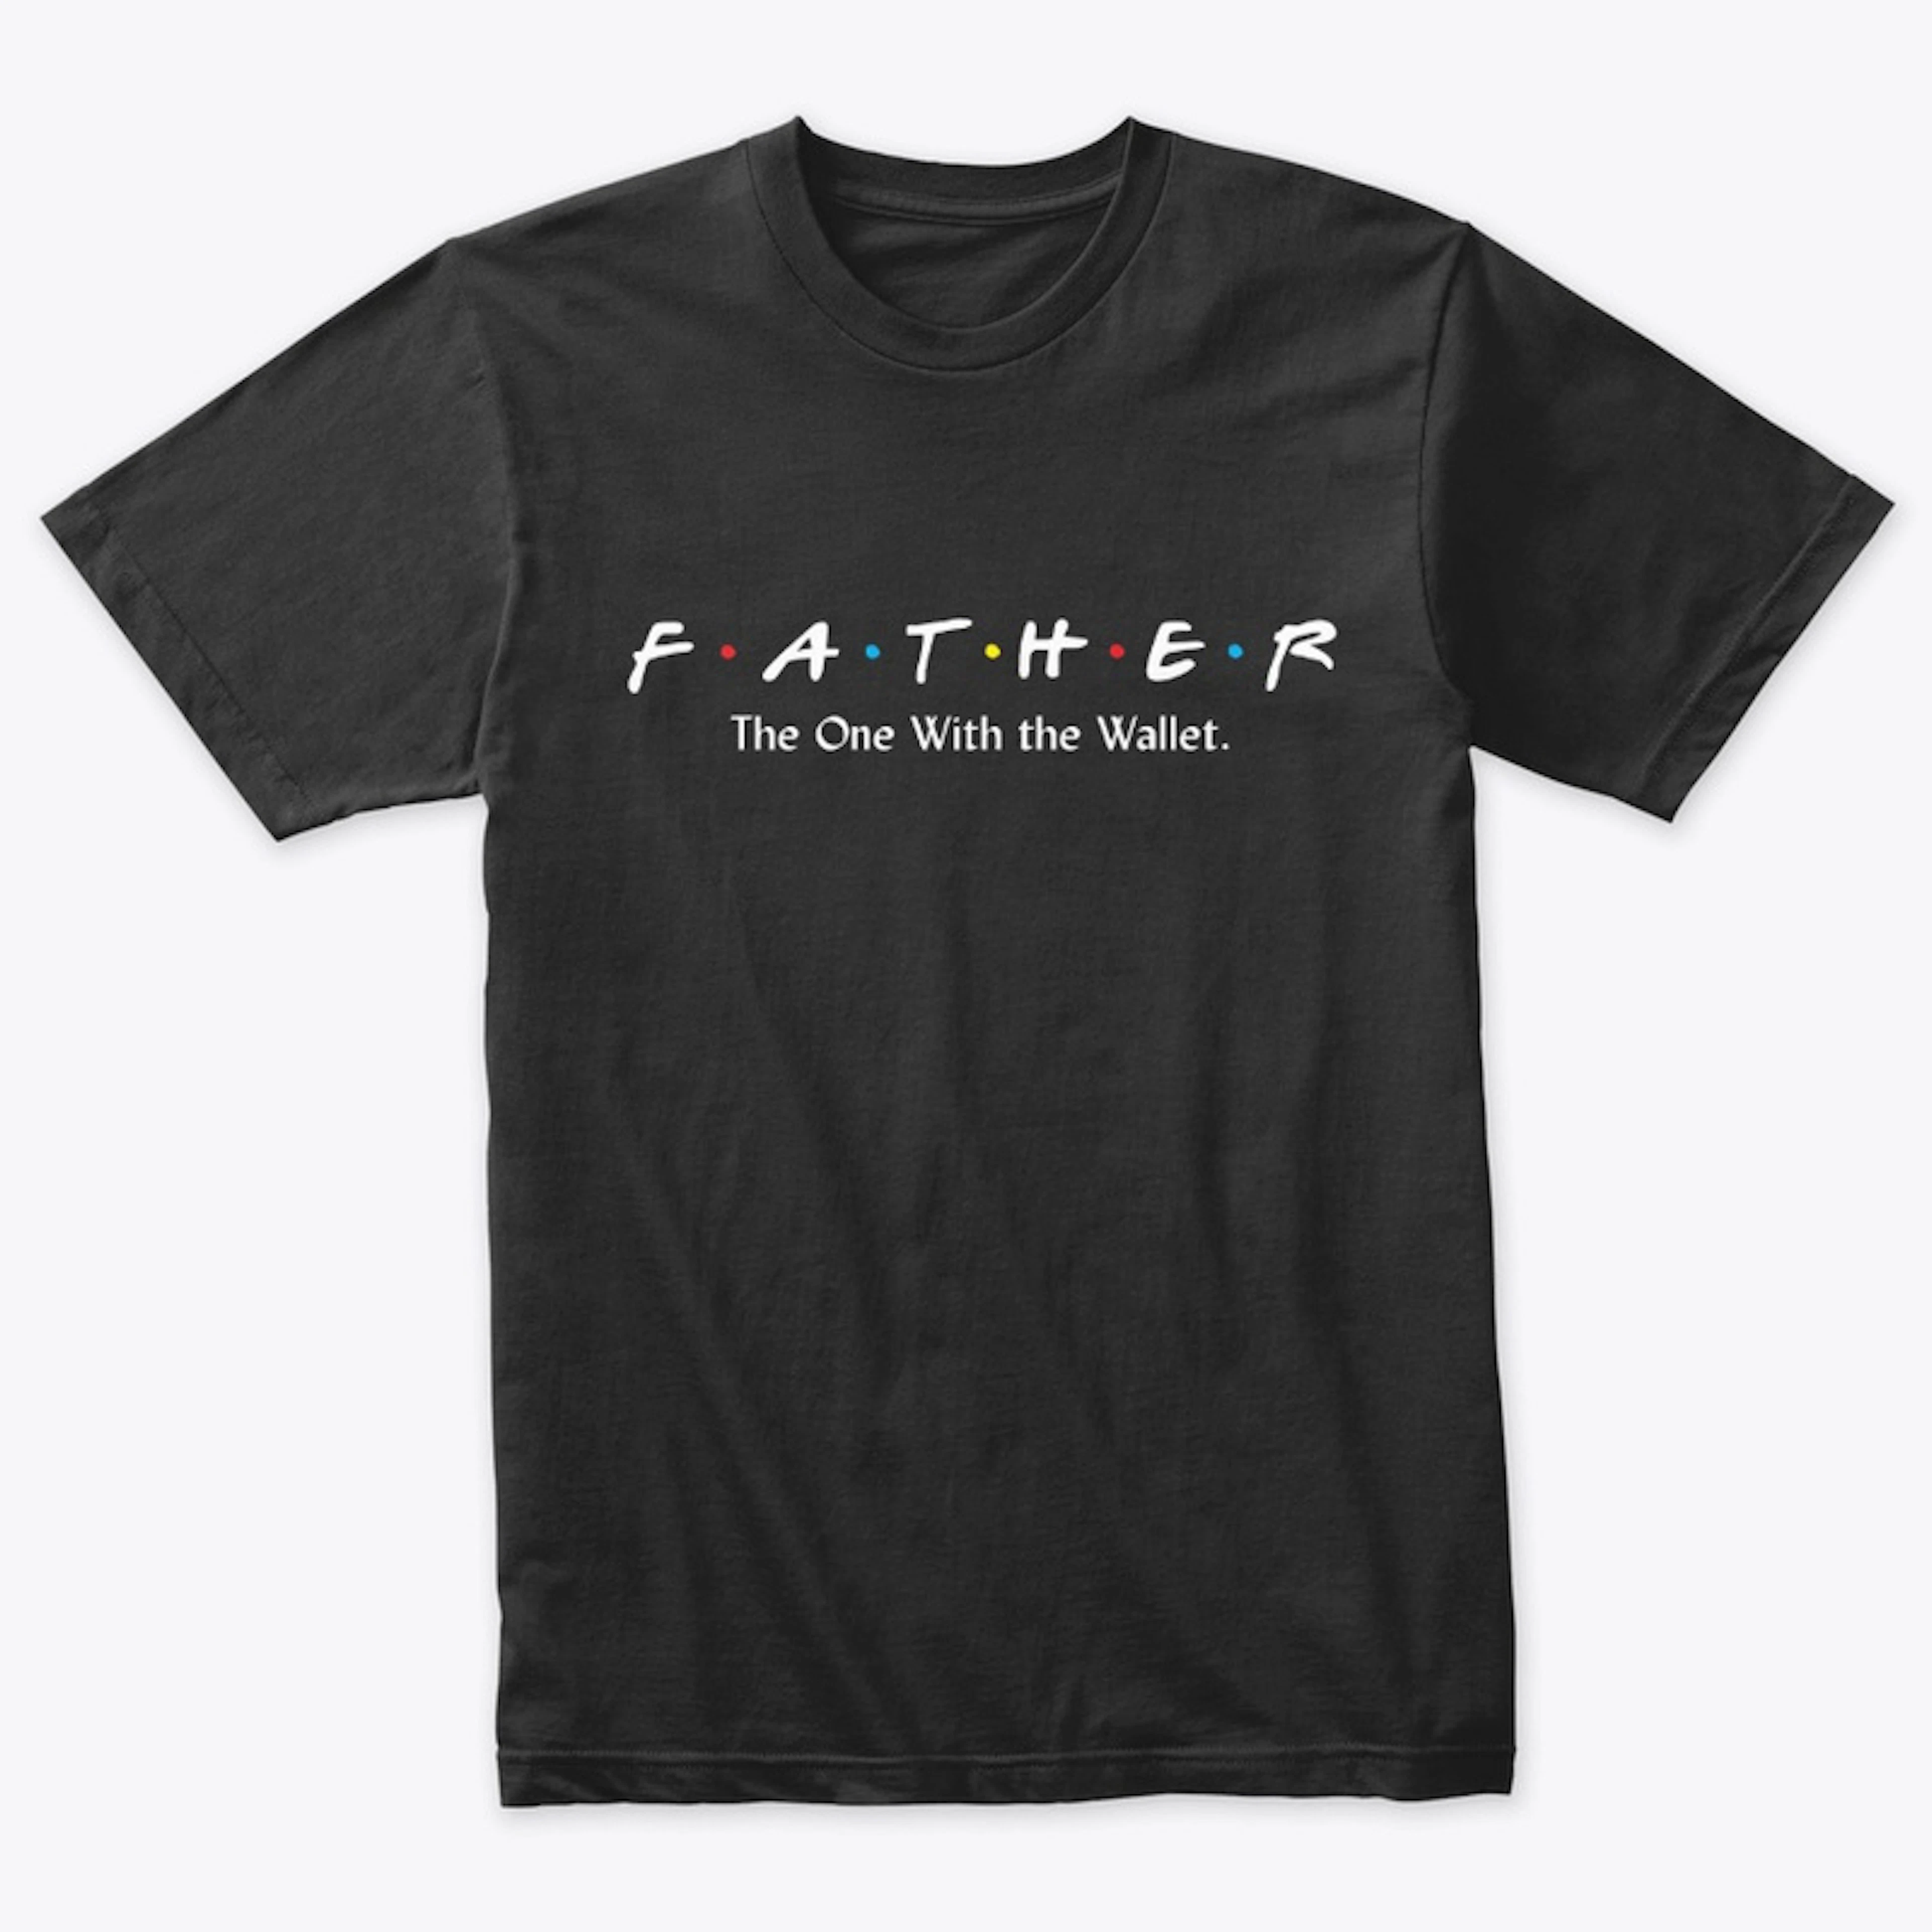 Father. The One With the Wallet.